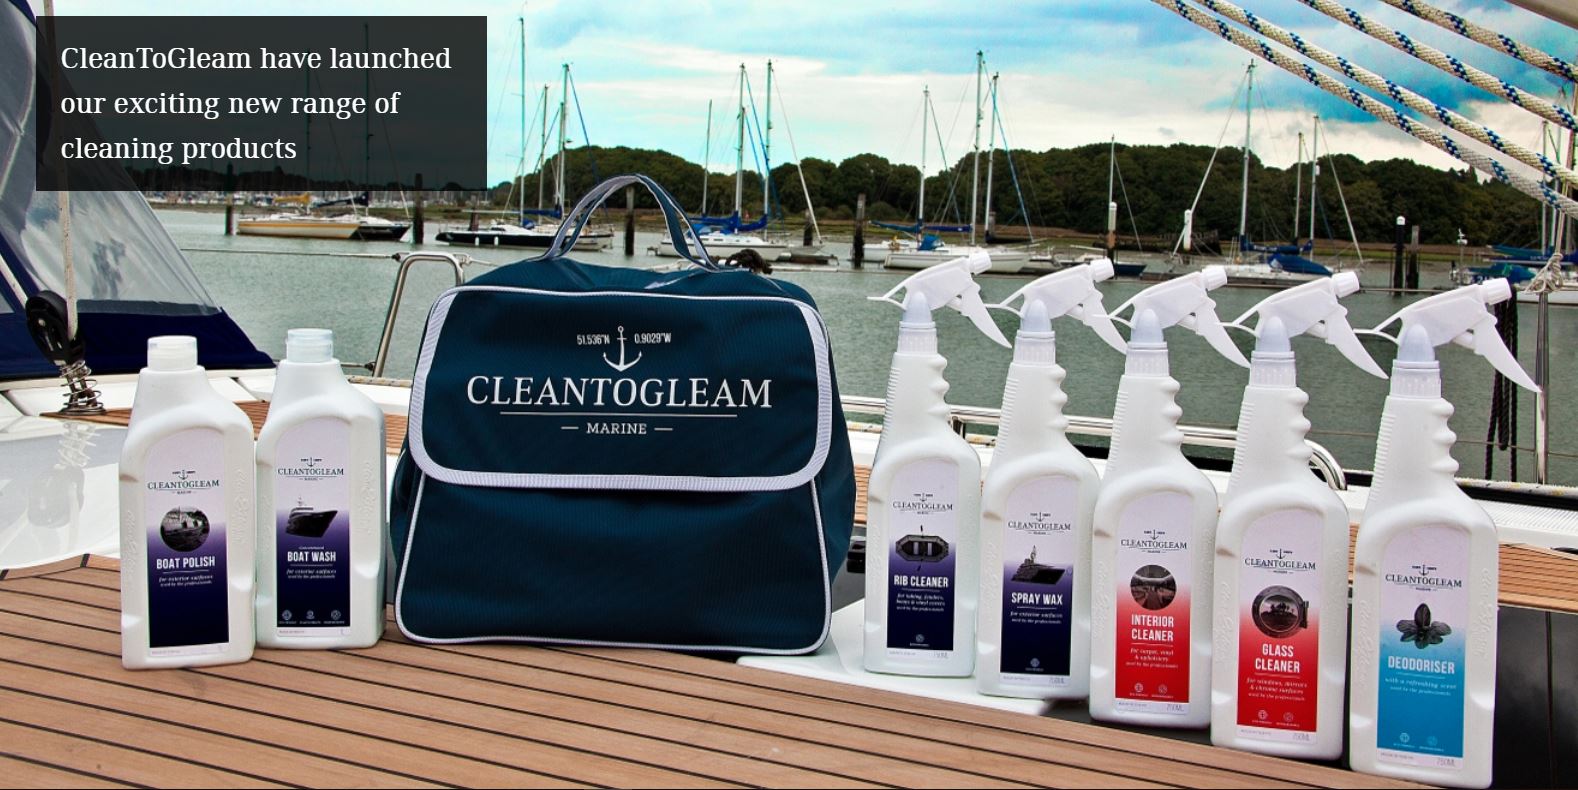 CleantoGleam’s Boat Wash products now available at MCK-Suppliers